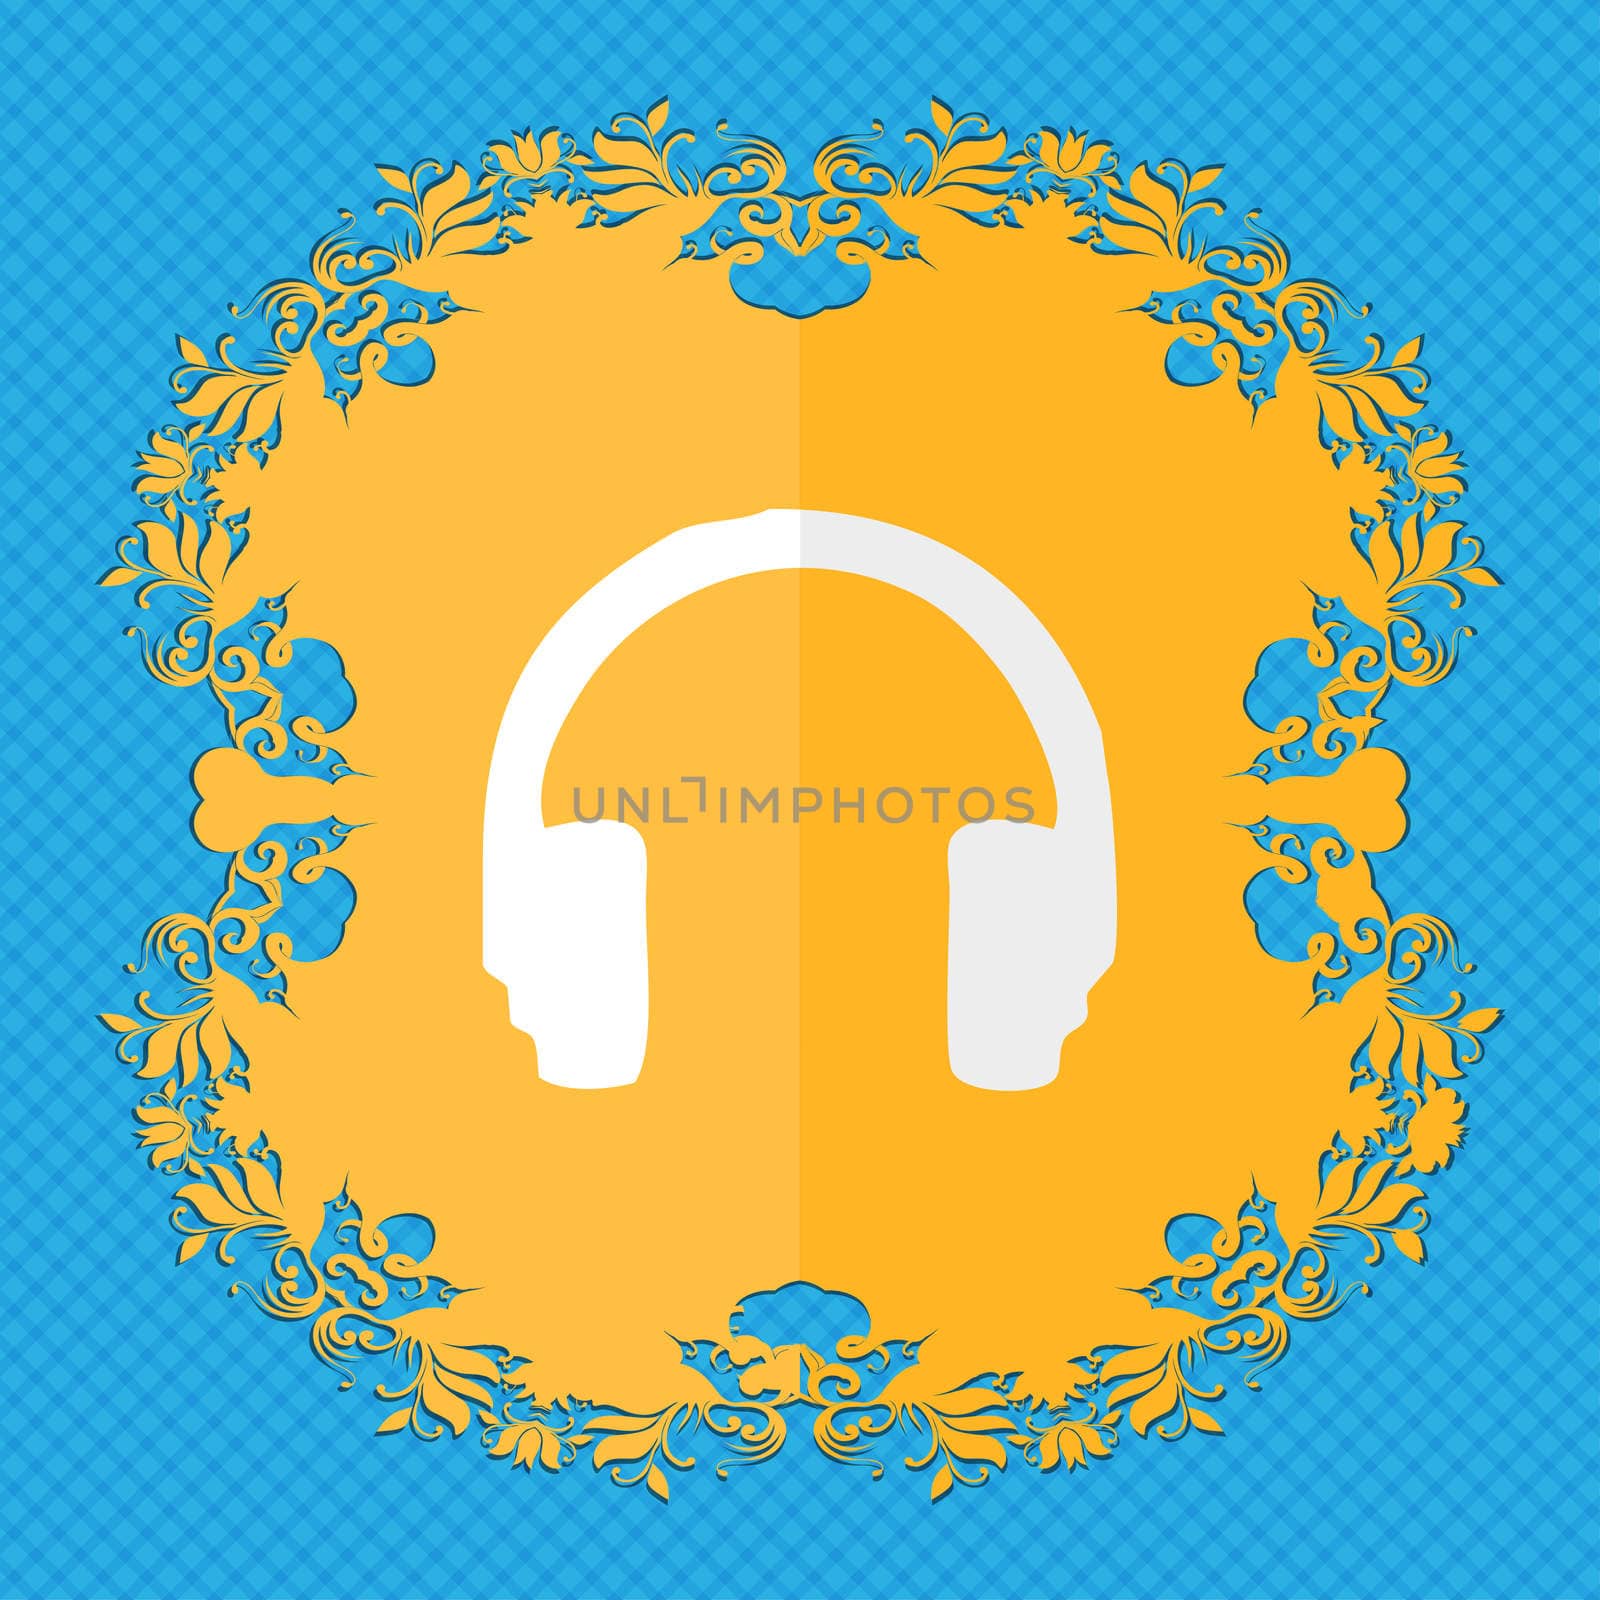 headsets. Floral flat design on a blue abstract background with place for your text. illustration